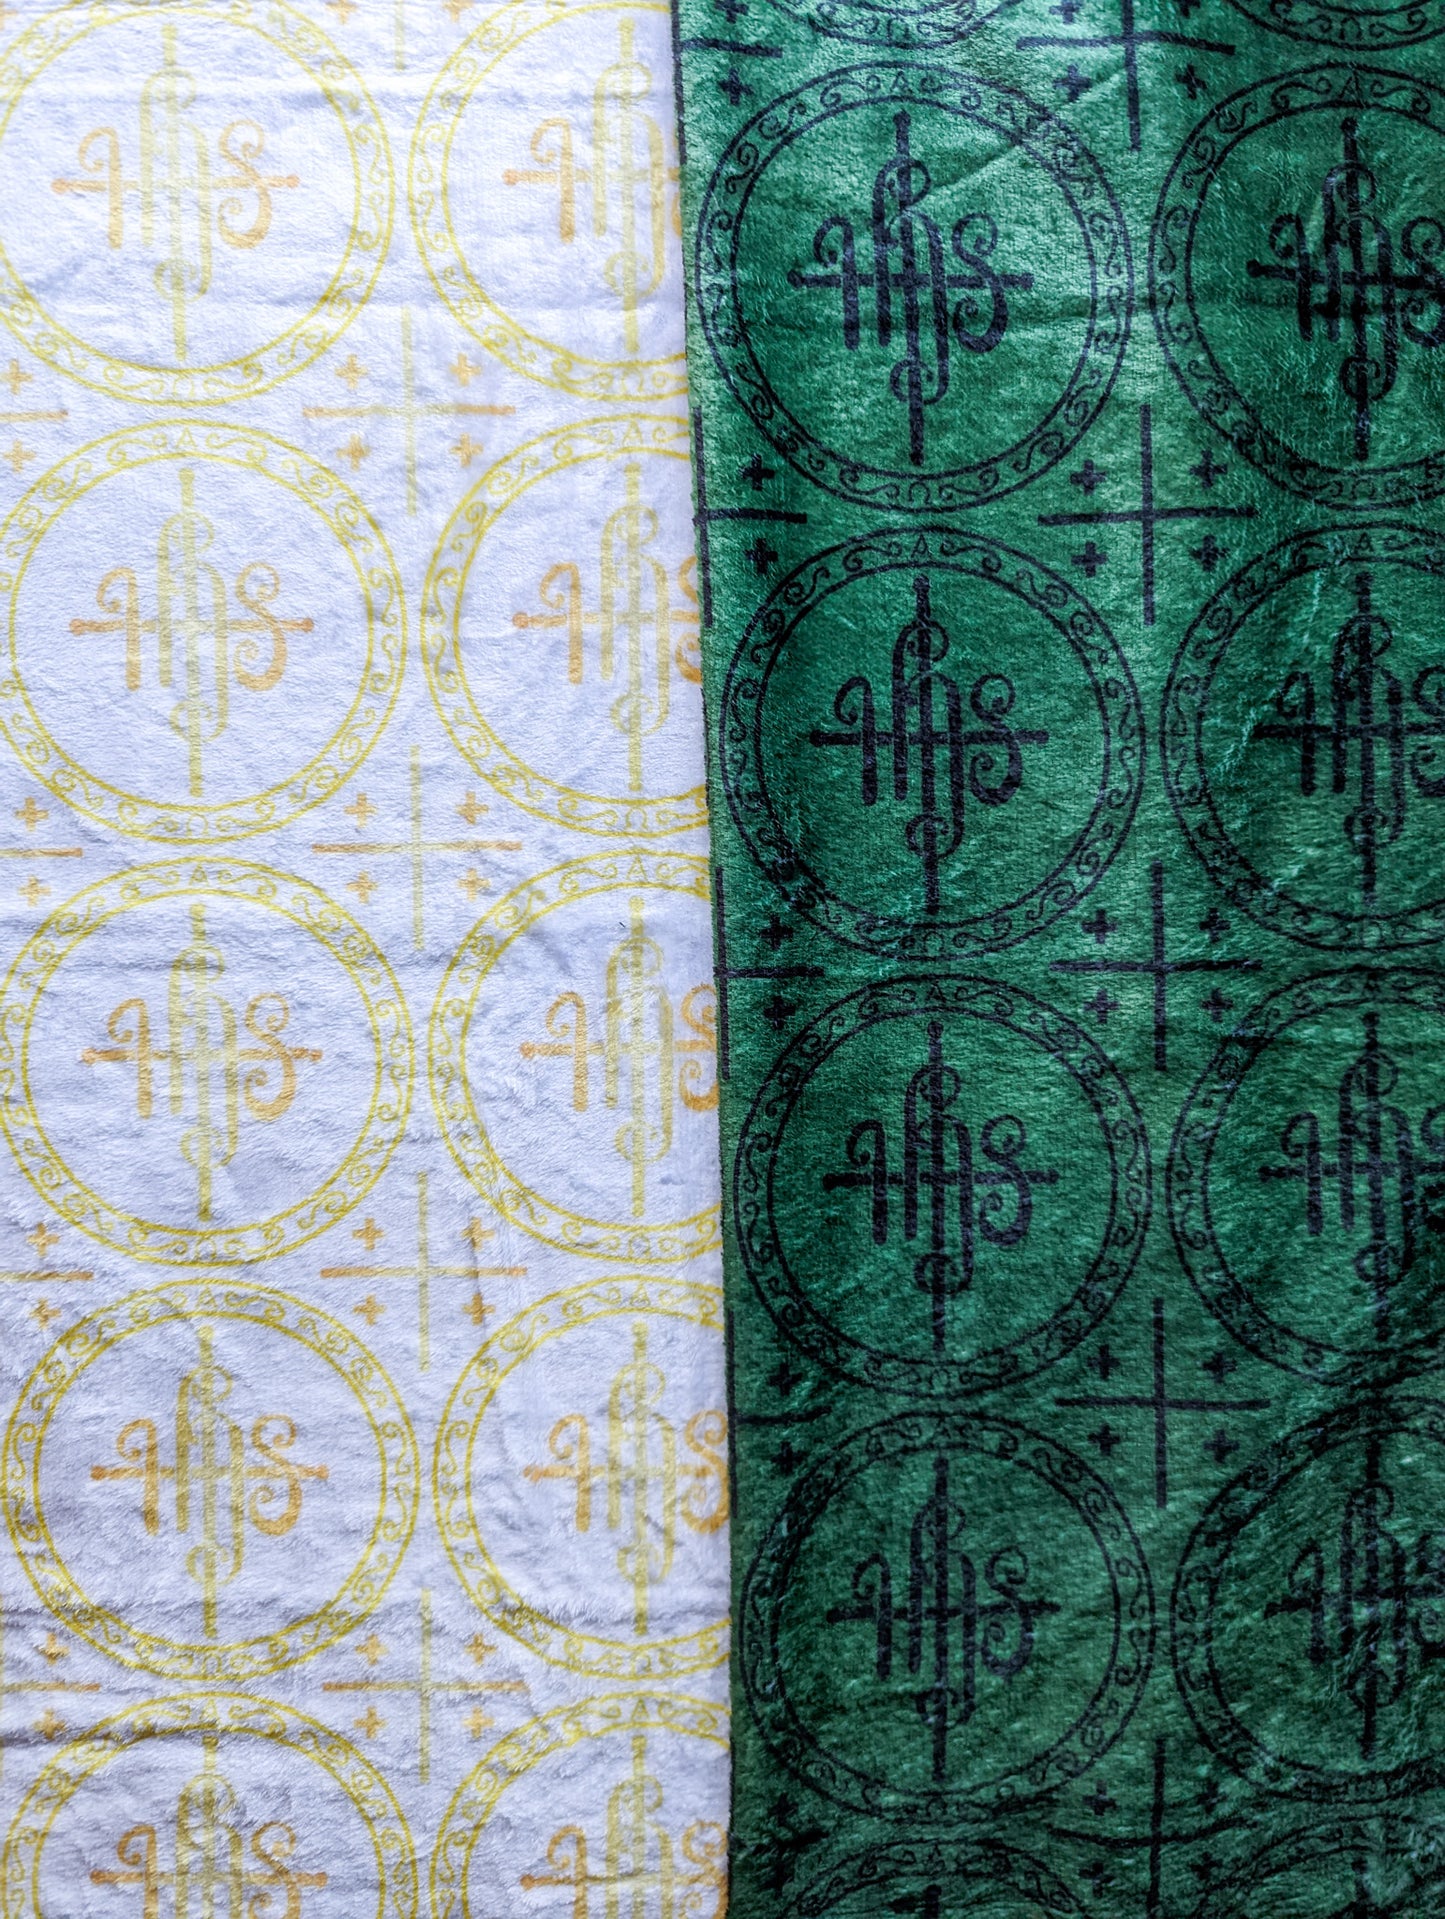 Green and White IHS Altar Cloth and Vestment Blanket